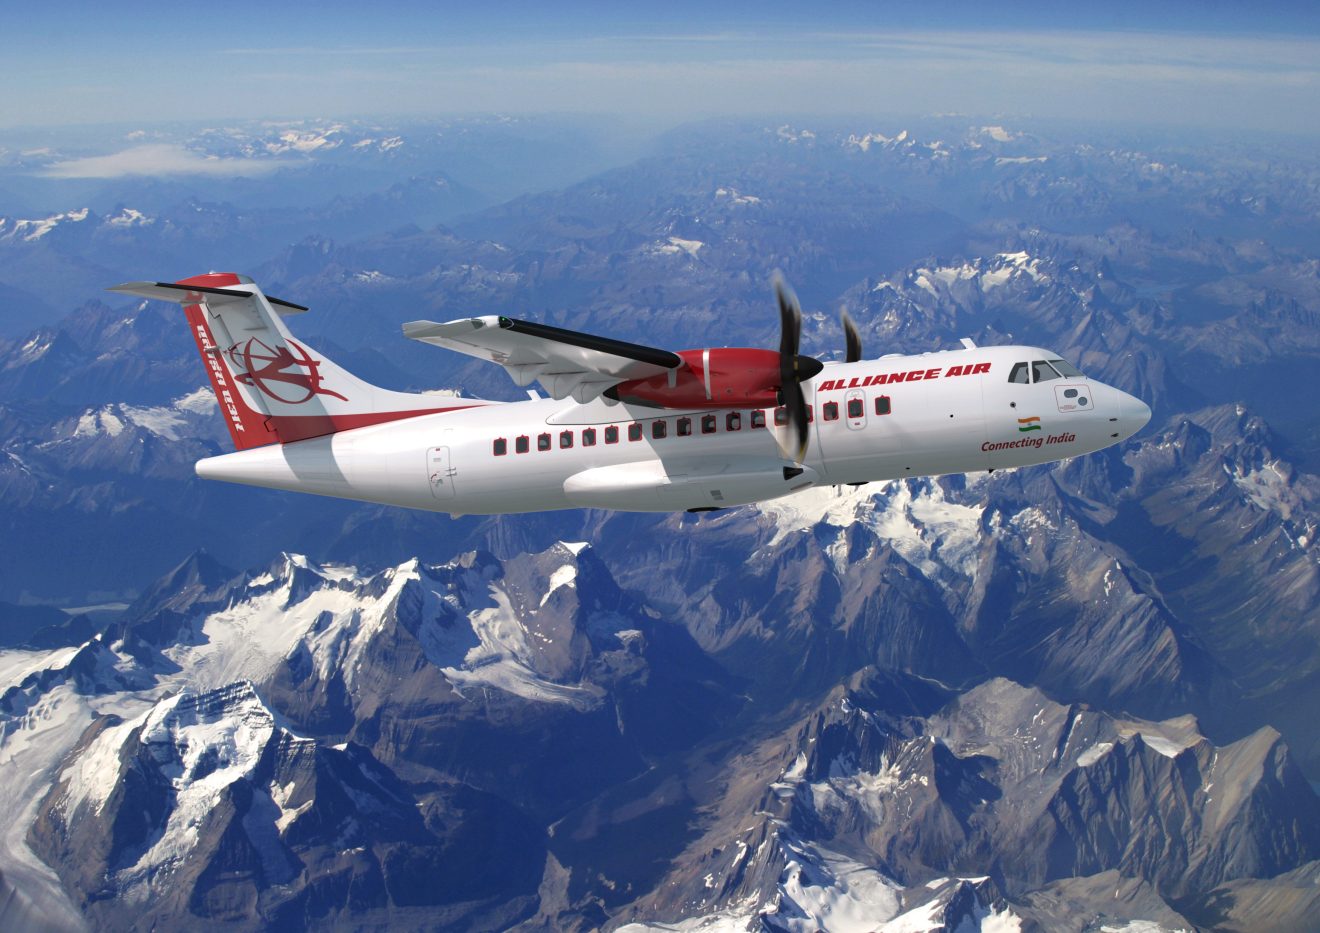 an Alliance Air ATR turboprop aircraft flying above mountains.